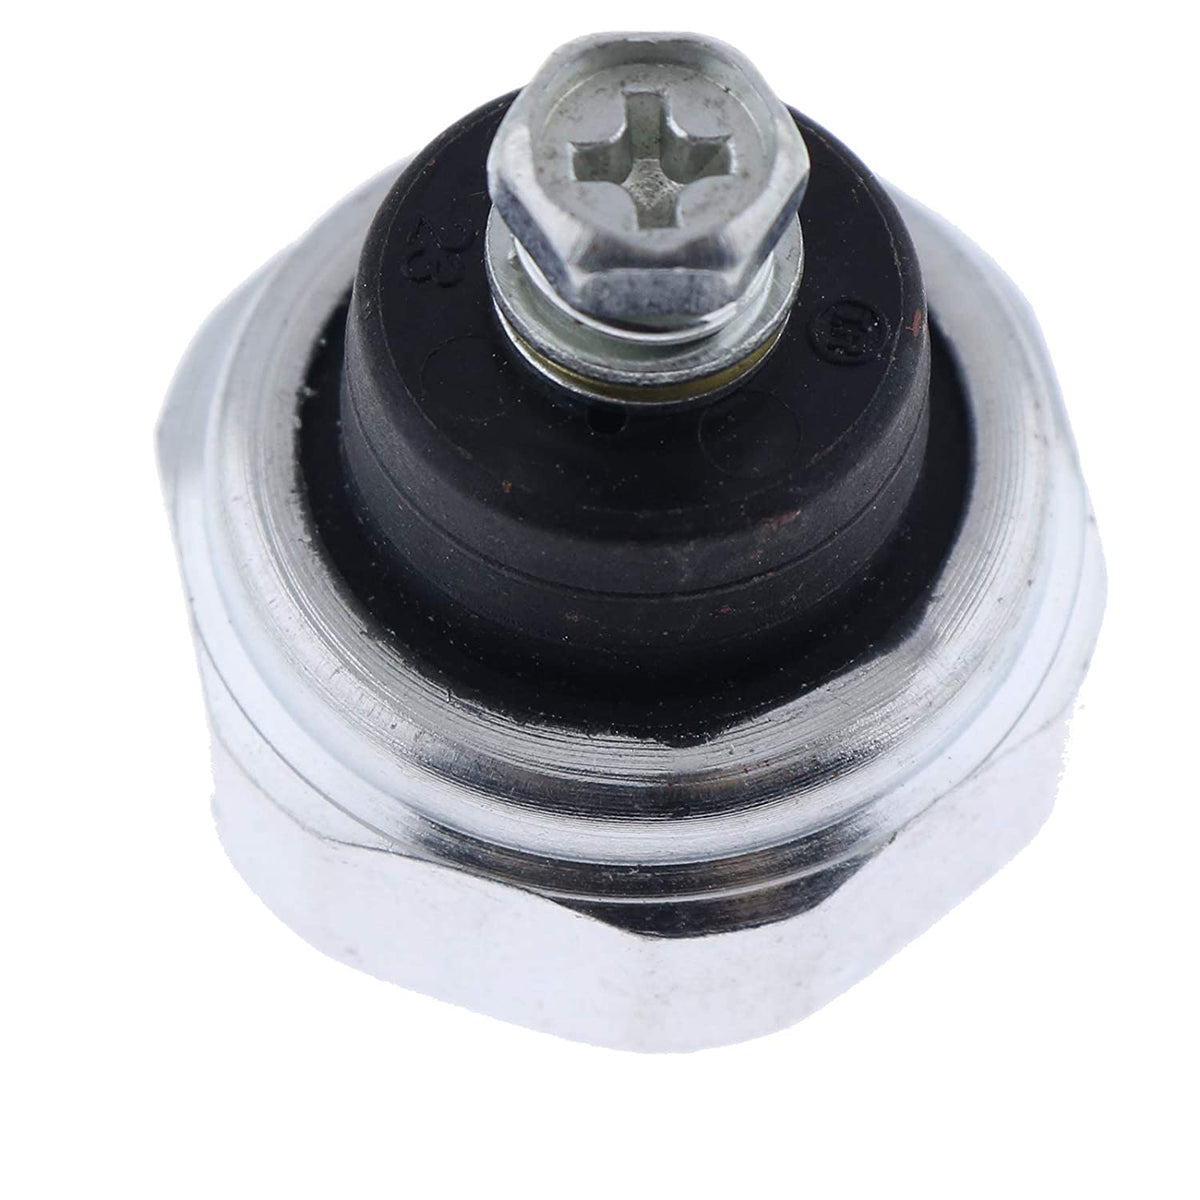 Oil Pressure Switch SBA185246011 SBA185246050 Compatible with Ford New Holland Tractors 1100 1110 1510 1710 1710O 1910 2110 1000 1200 1300 1500 1600 1700 1900 - KUDUPARTS